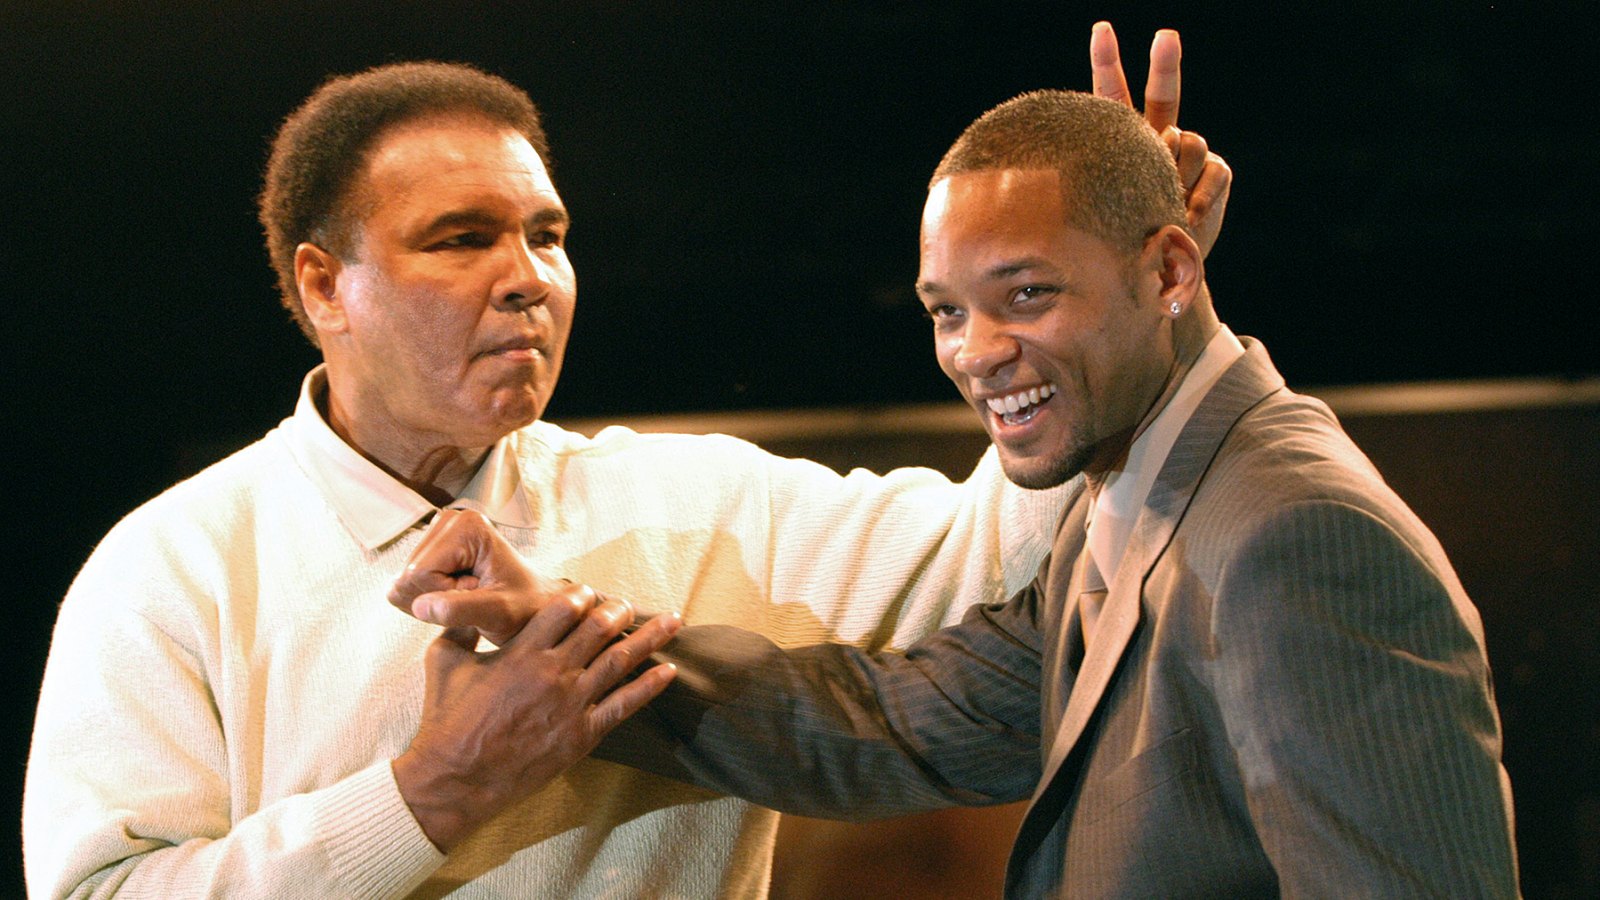 Muhammad Ali gestures behind the head of actor Will Smith at the Miami Art Basel Taschen book premiere of Ali's new book, 'GOAT - Greatest Of All Time' at the Miami Convention Center December 6, 2003 in Miami, Florida.